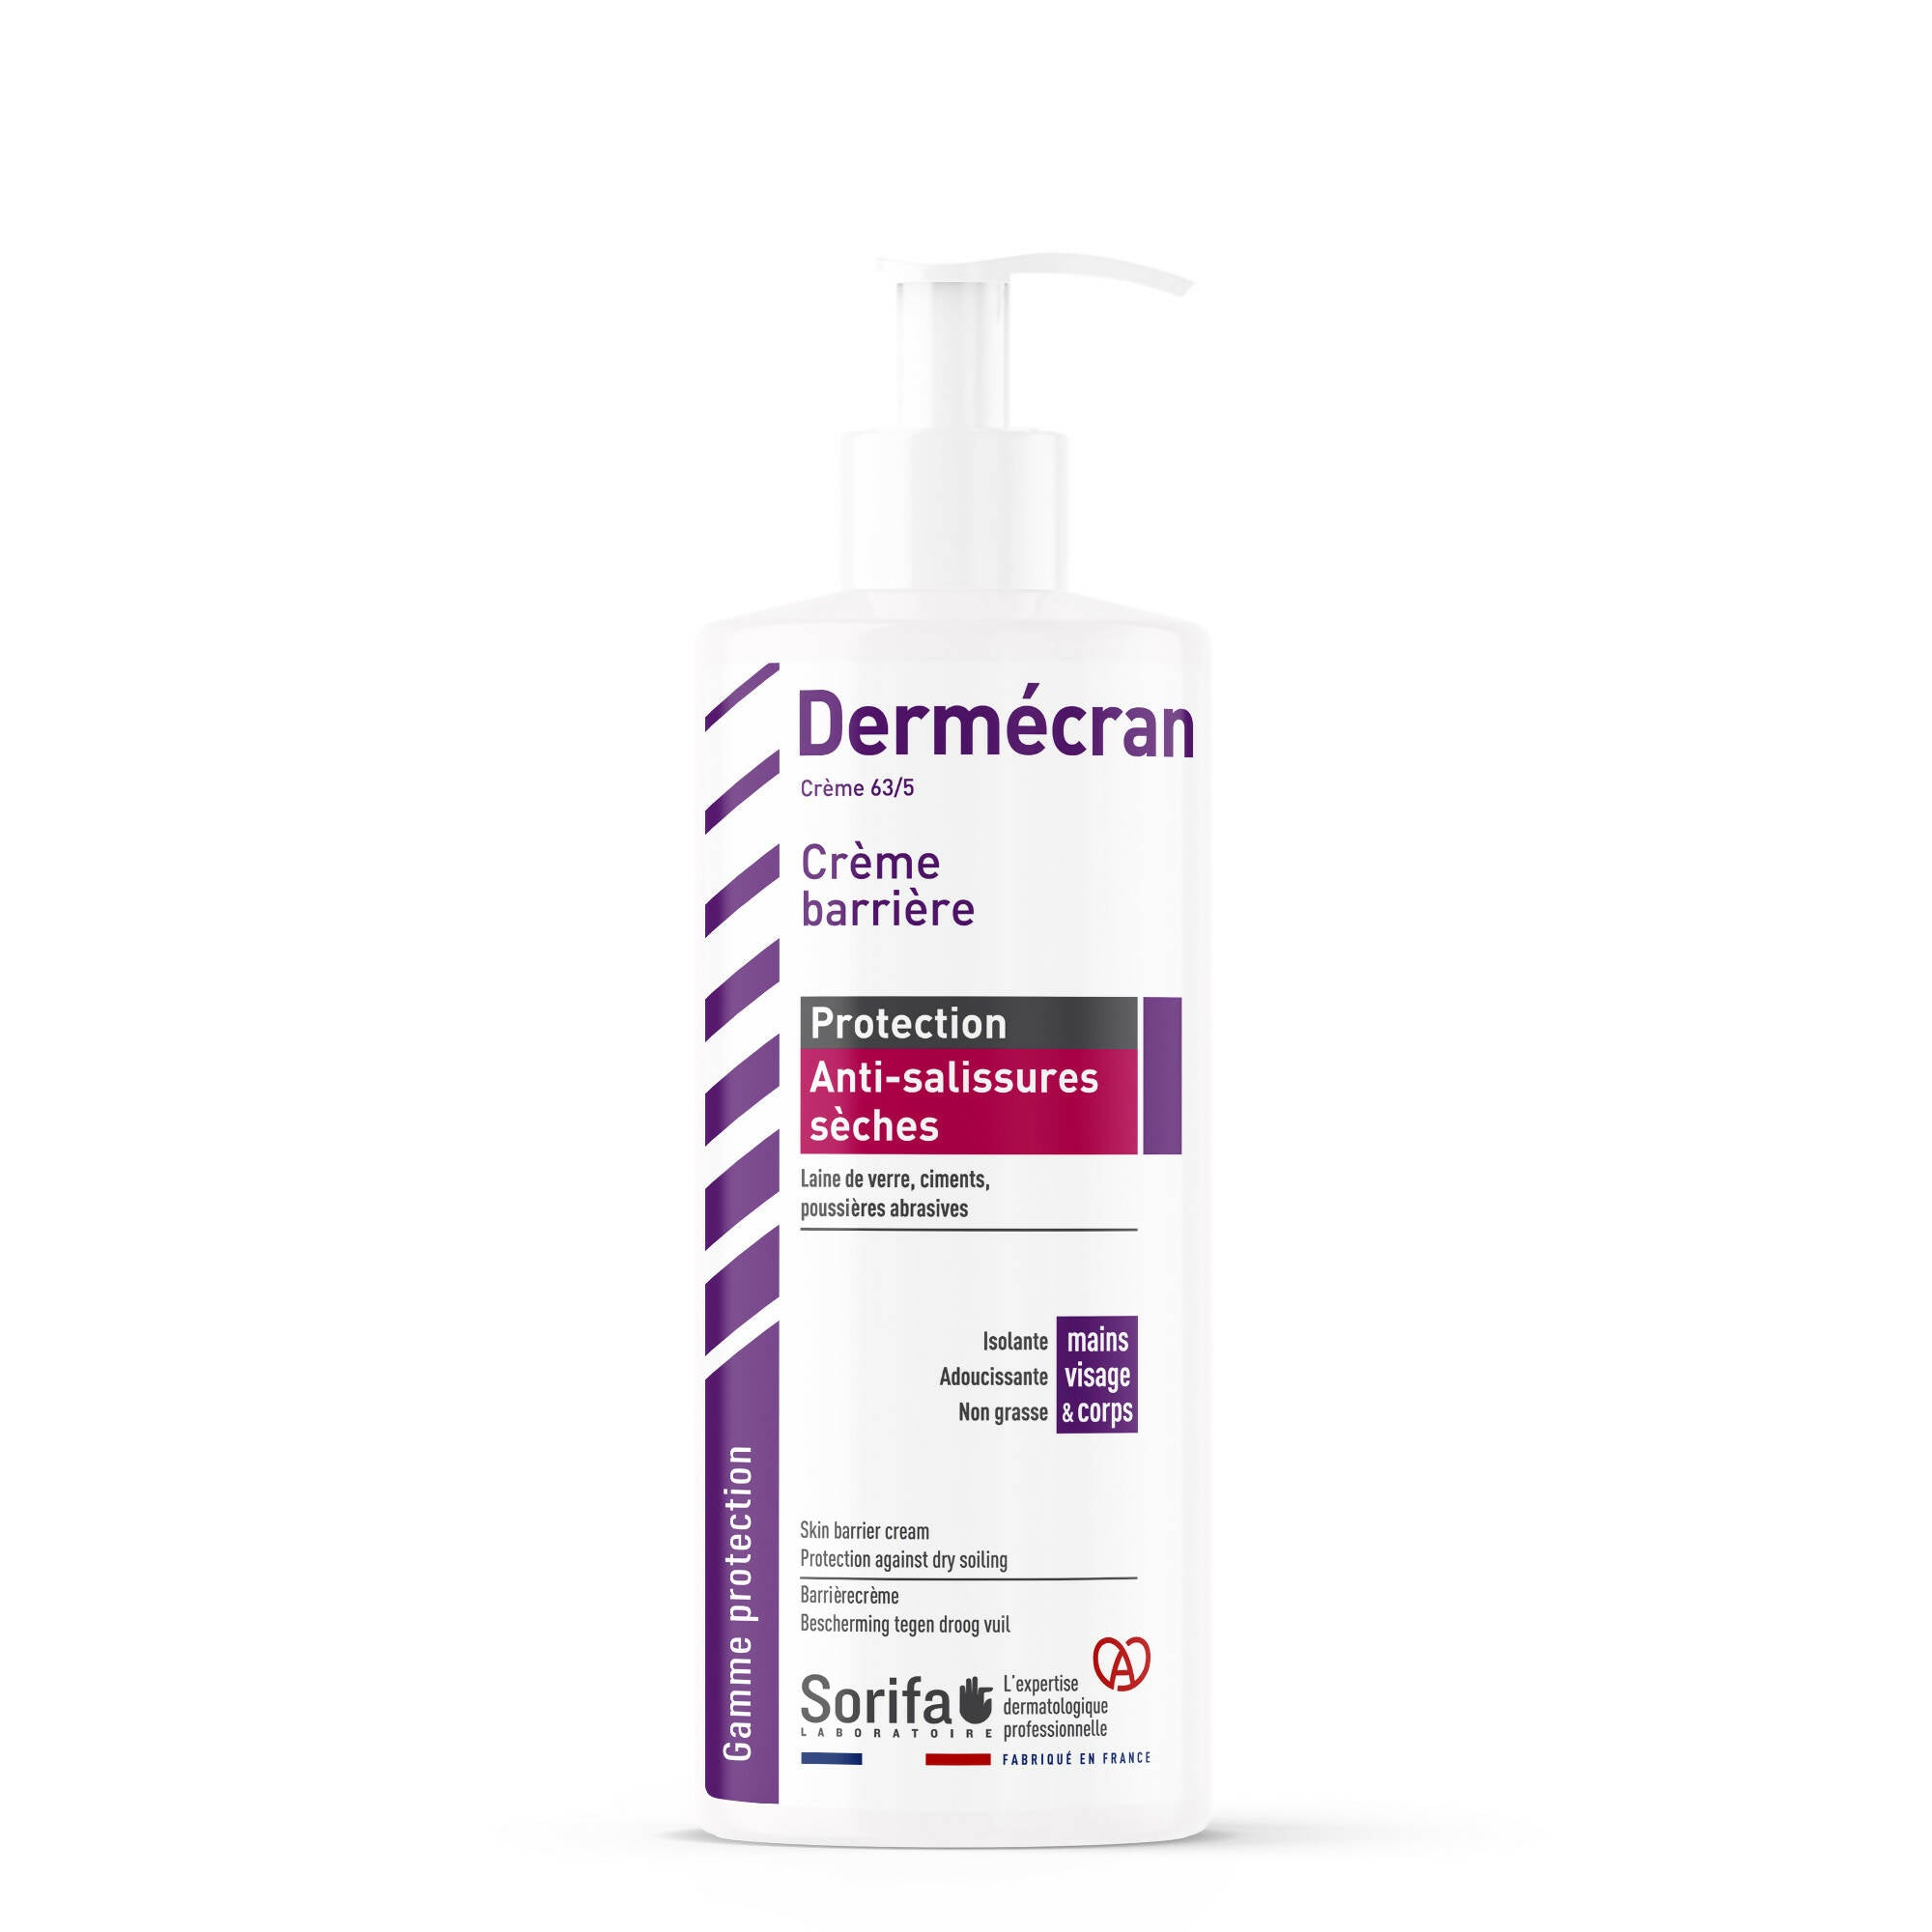 SORIFA - Complete box of 24 - Dermscreen - Barrier cream - ANTI-DRY DIRT protection - Glass wool - cement - dust - Hands, face and body - High tolerance - 500 ml pump bottle. - 0